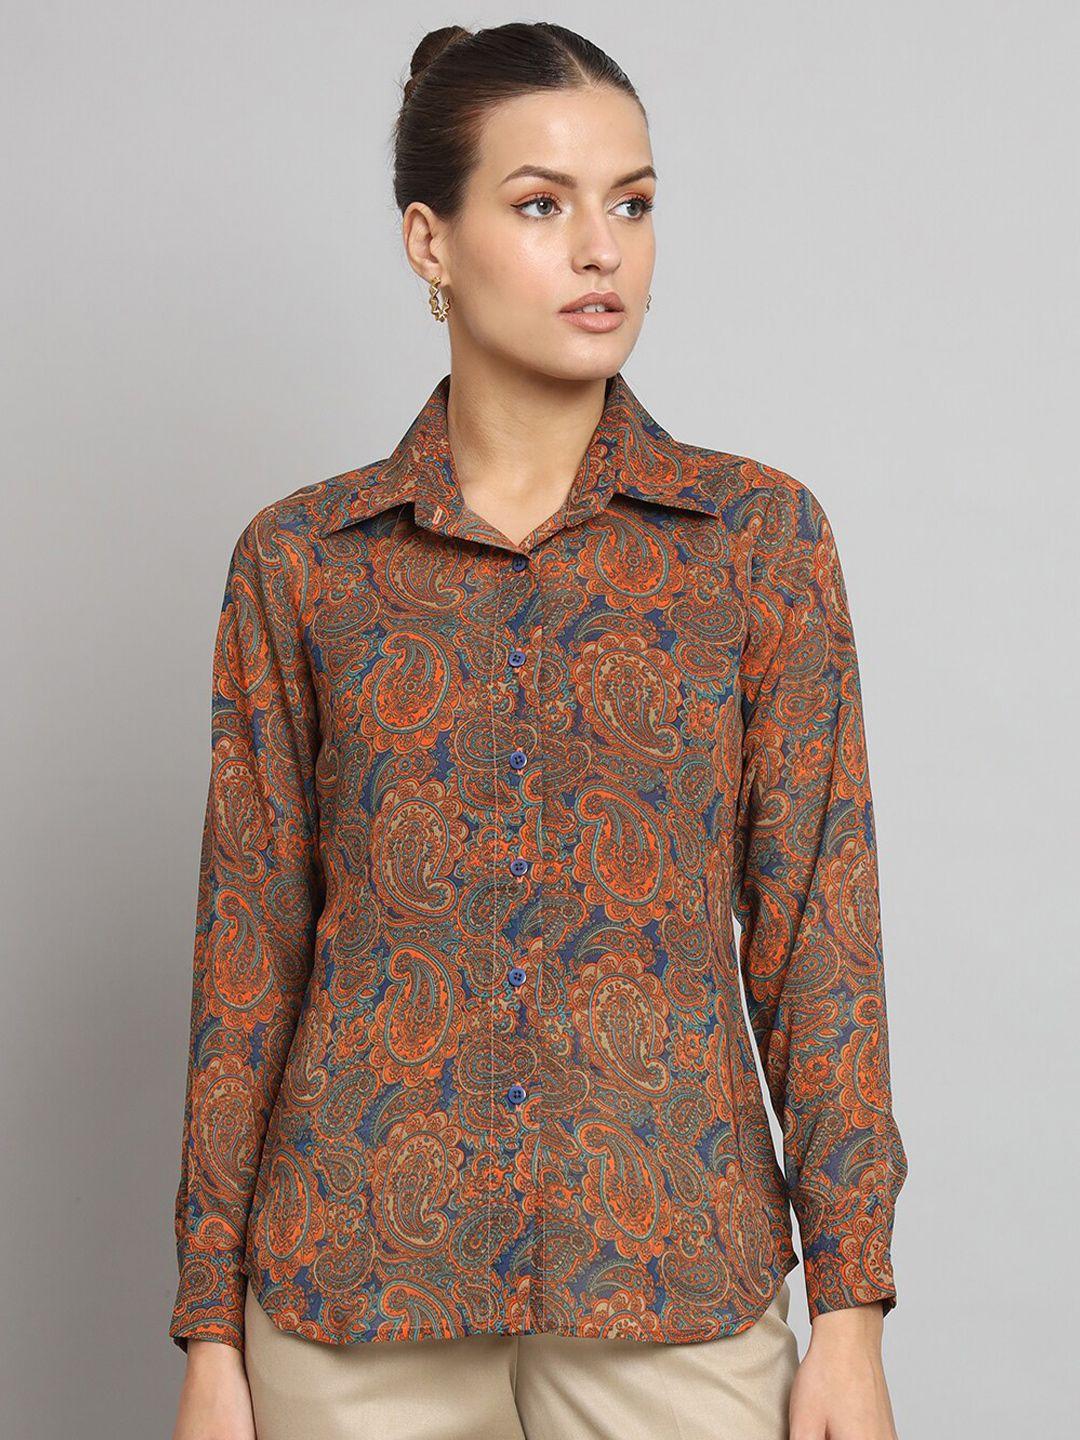 powersutra classic paisley printed wrinkle free georgette casual shirt